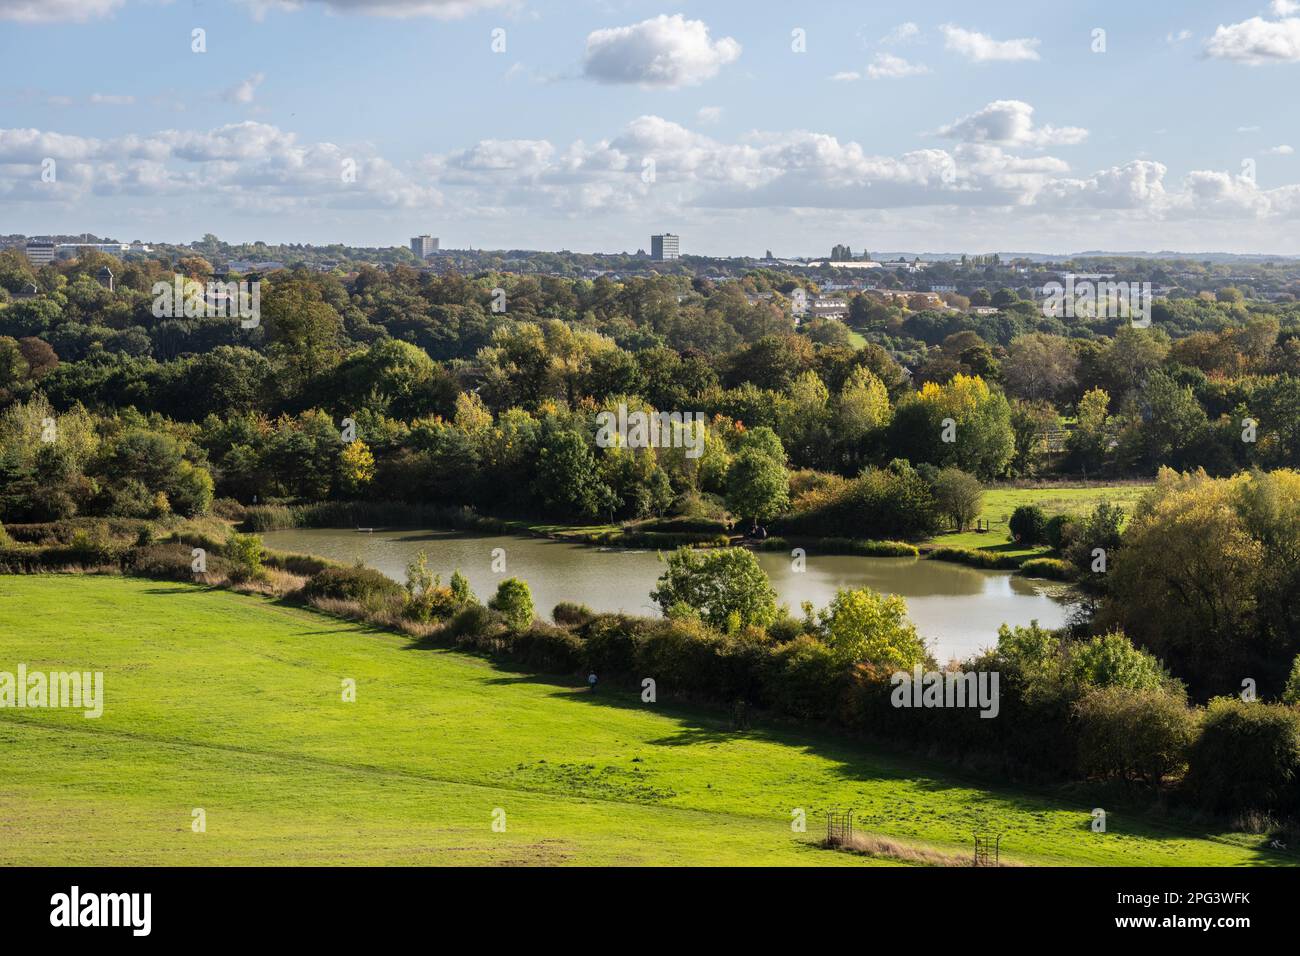 The view looking down on Duchess Pond and the suburbs of north east Bristol from Purdown hill in Stoke Park. Stock Photo